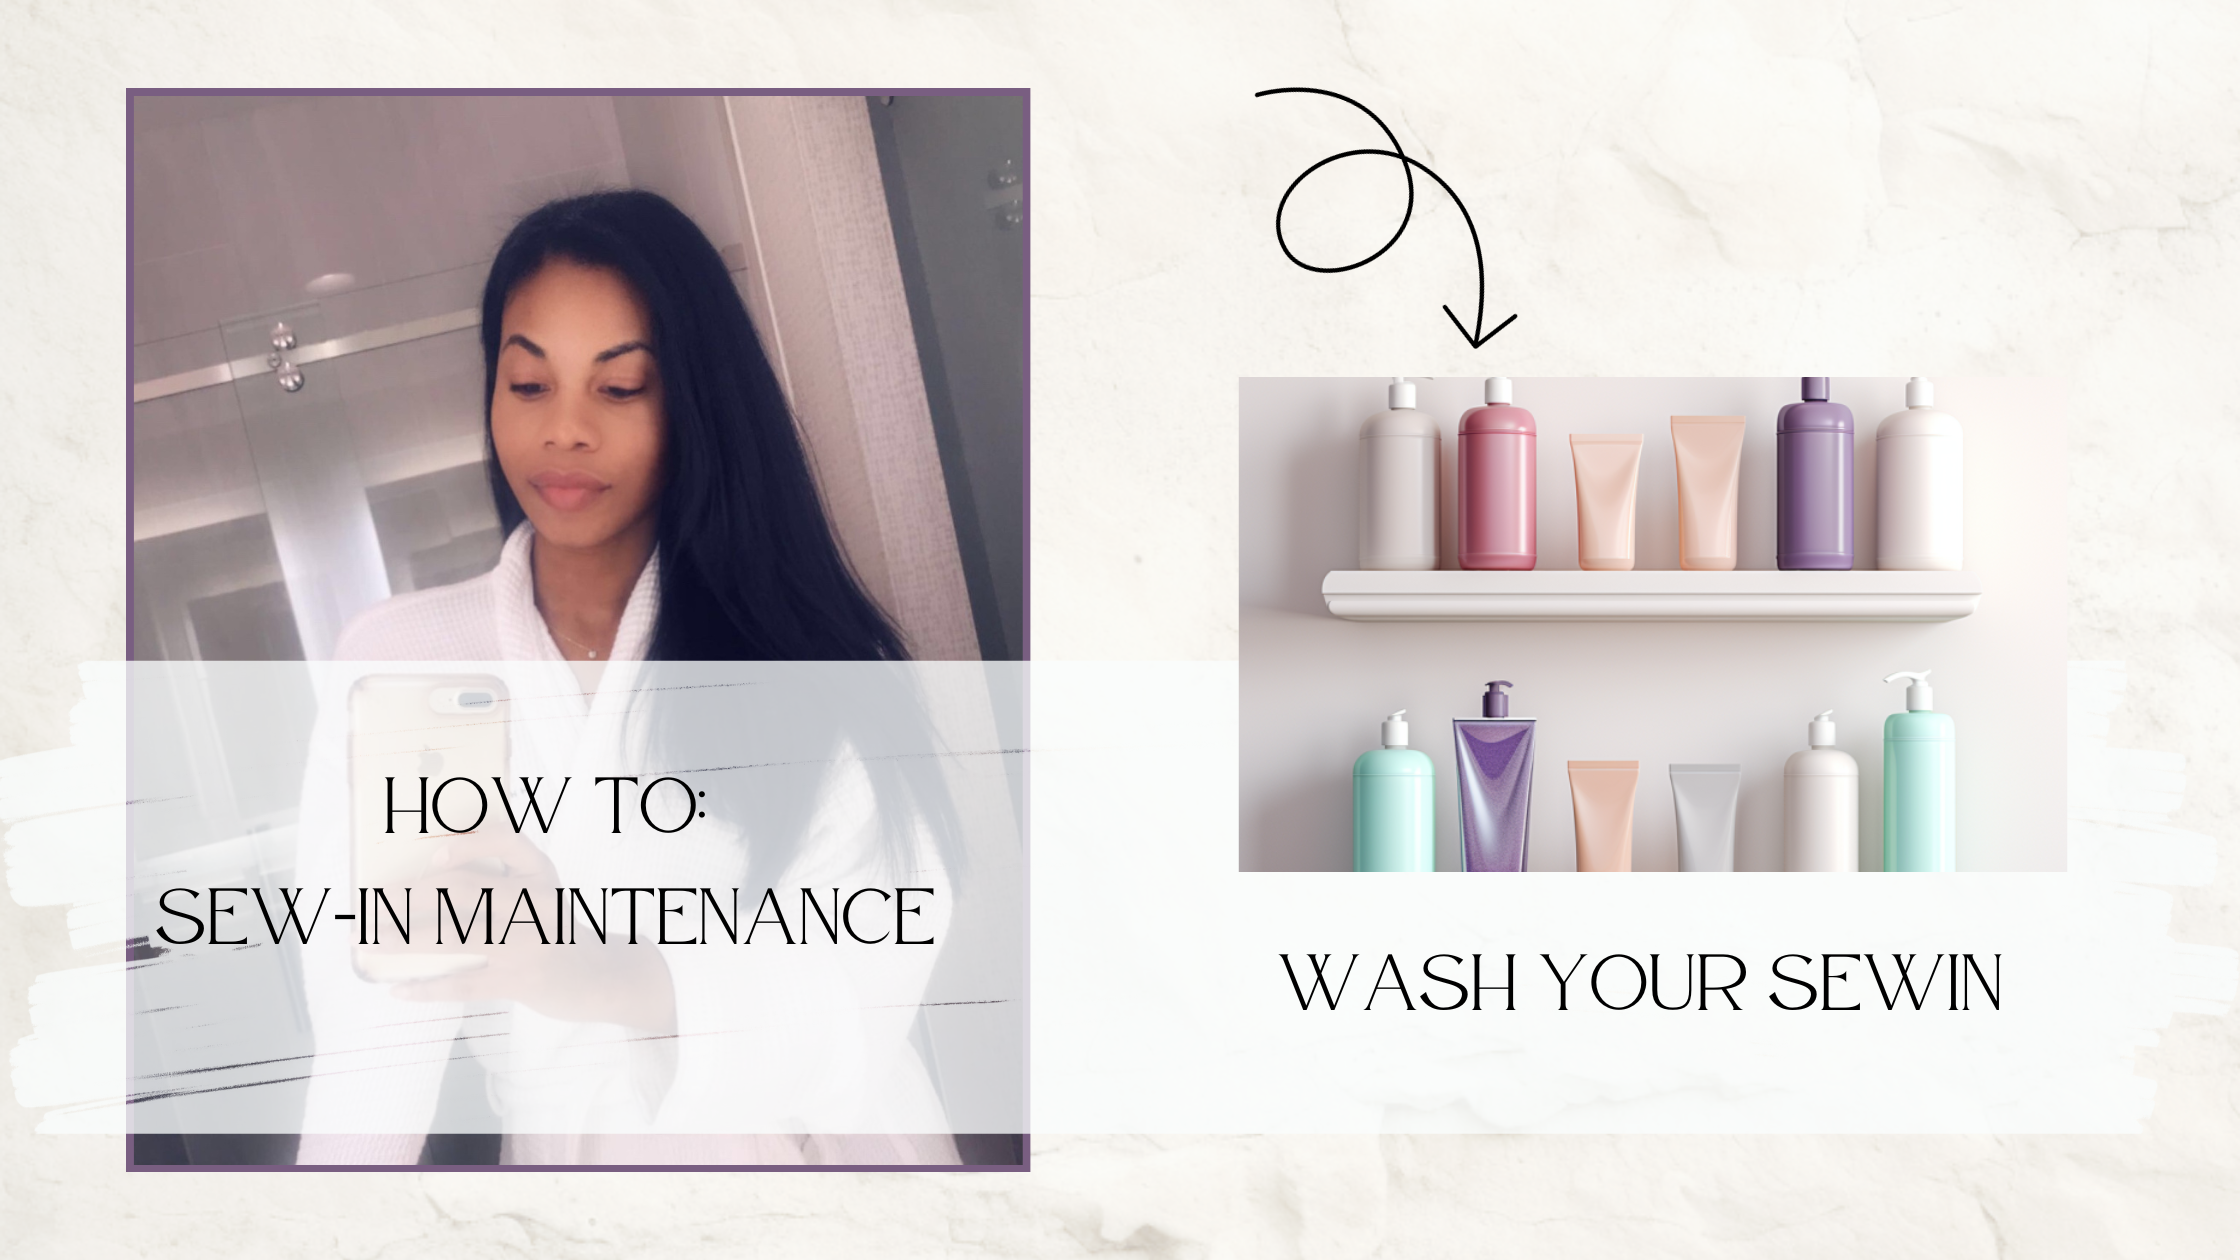 How To Wash Your Sew-In